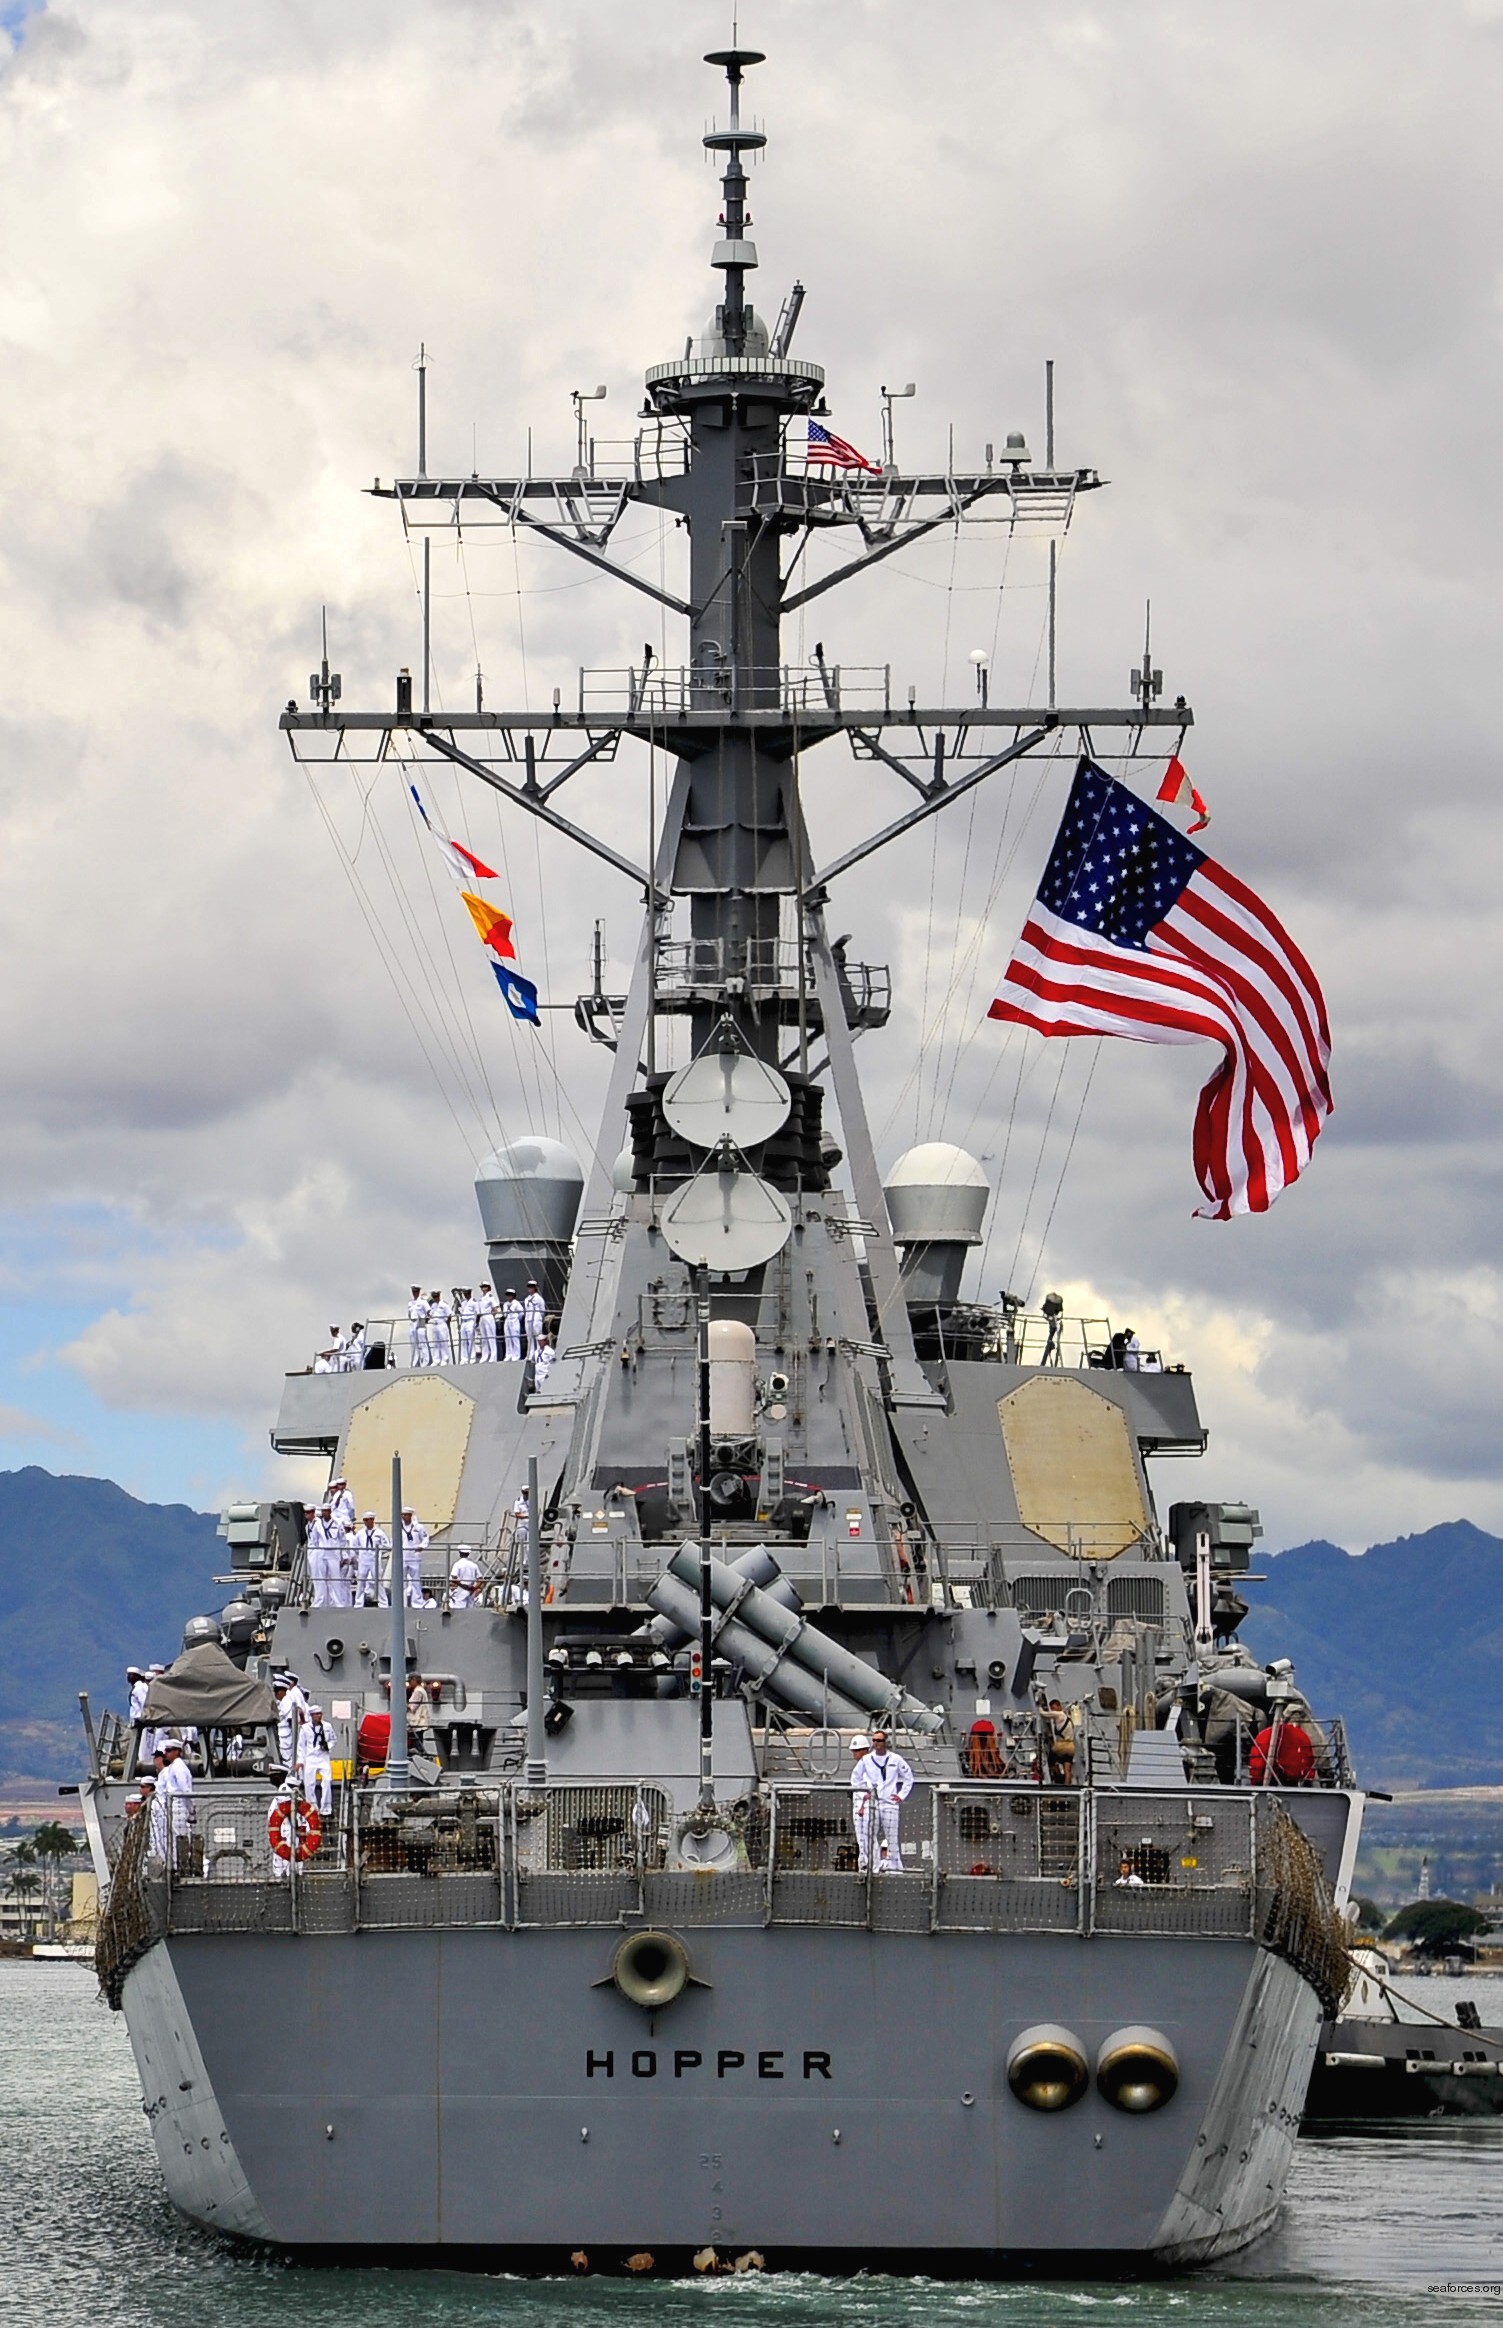 ddg-70 uss hopper guided missile destroyer arleigh burke class aegis bmd 20 joint base pearl harbor hickam hawaii